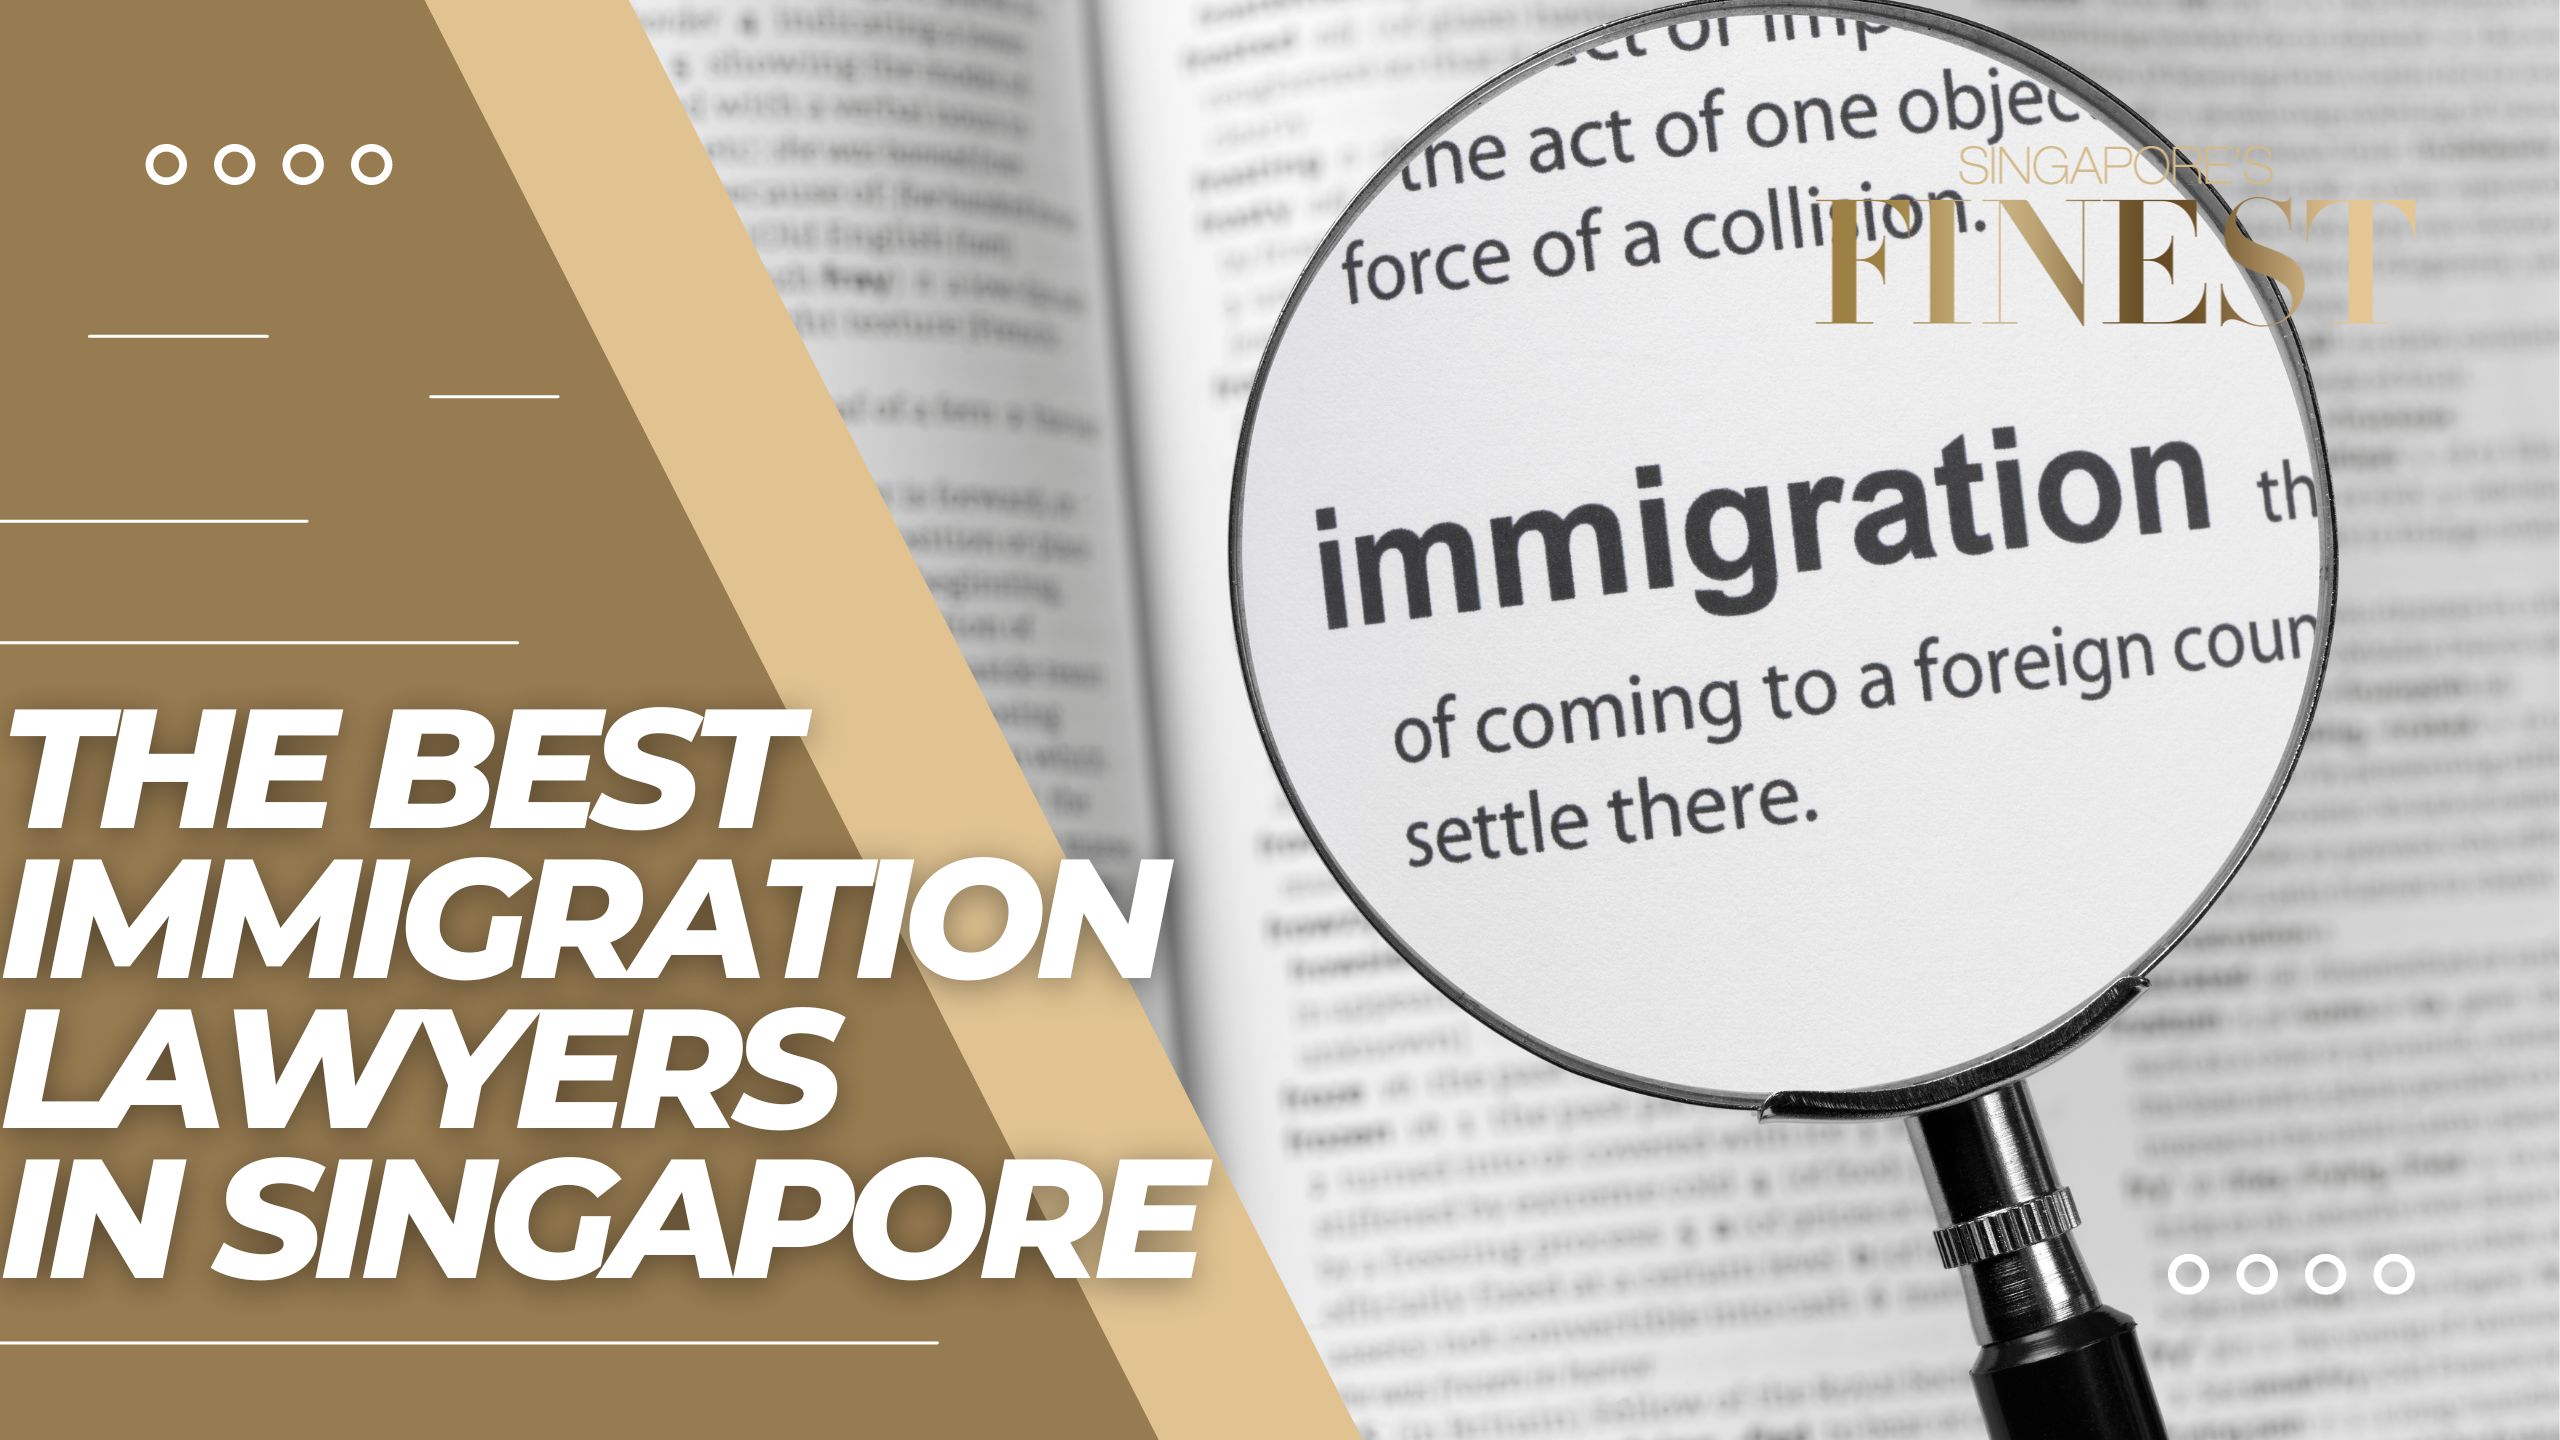 The Finest Immigration Lawyers in Singapore